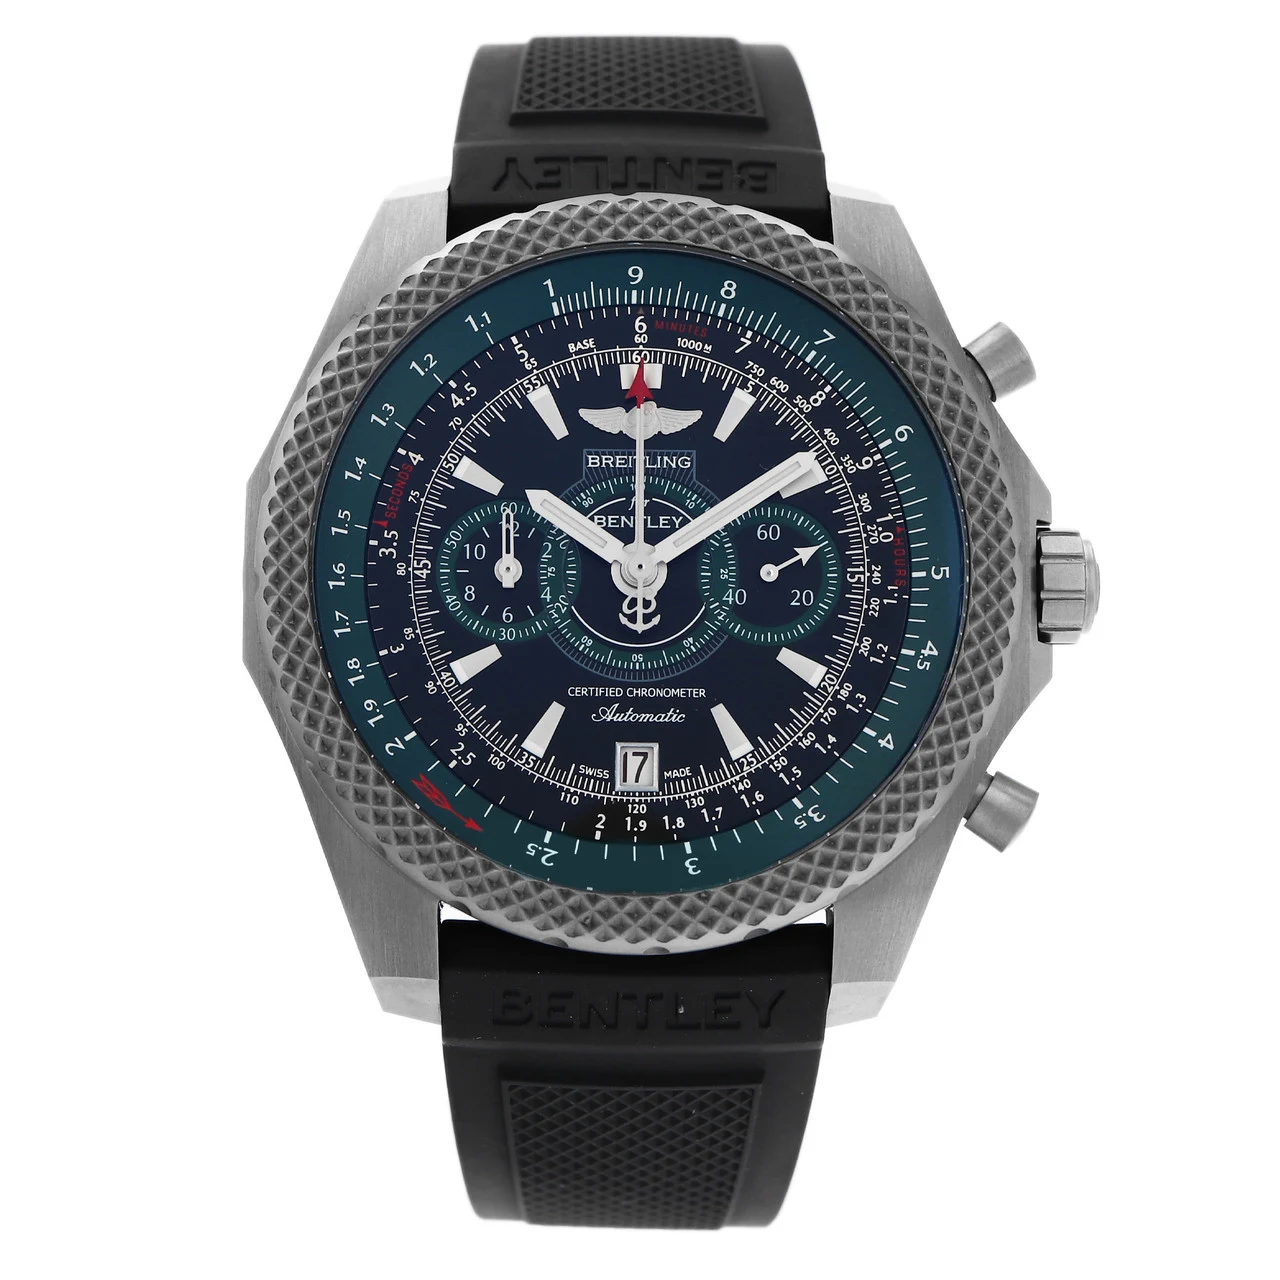 Breitling Bentley Supersports 49 Titanium / Black / Strap - Limited to 1,000 Pieces E27365  Listing Image 1